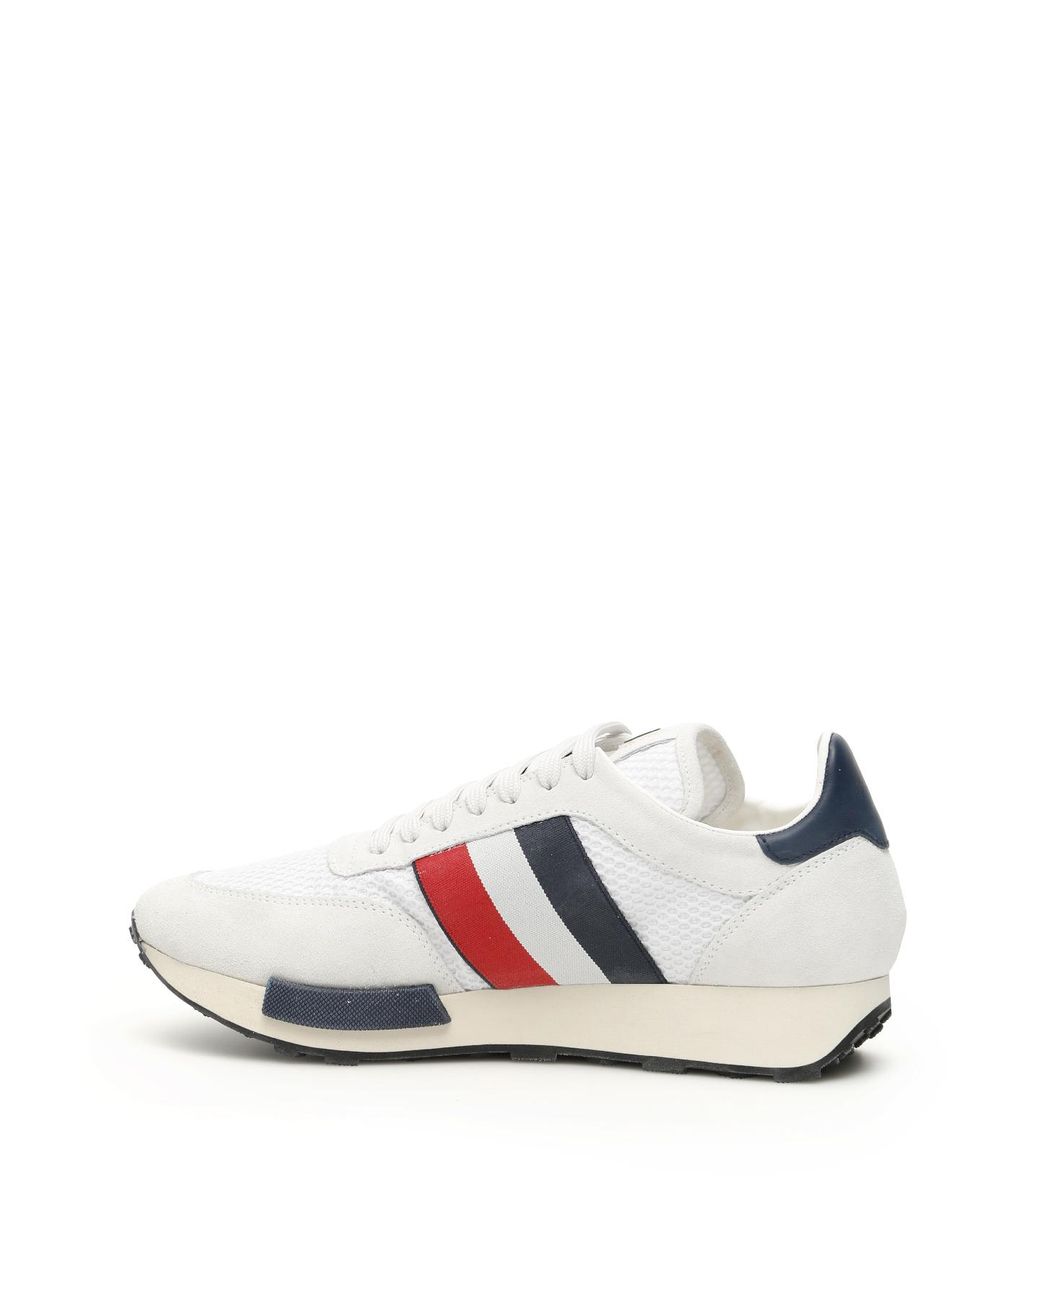 Moncler Suede Horace Sneakers for Men | Lyst